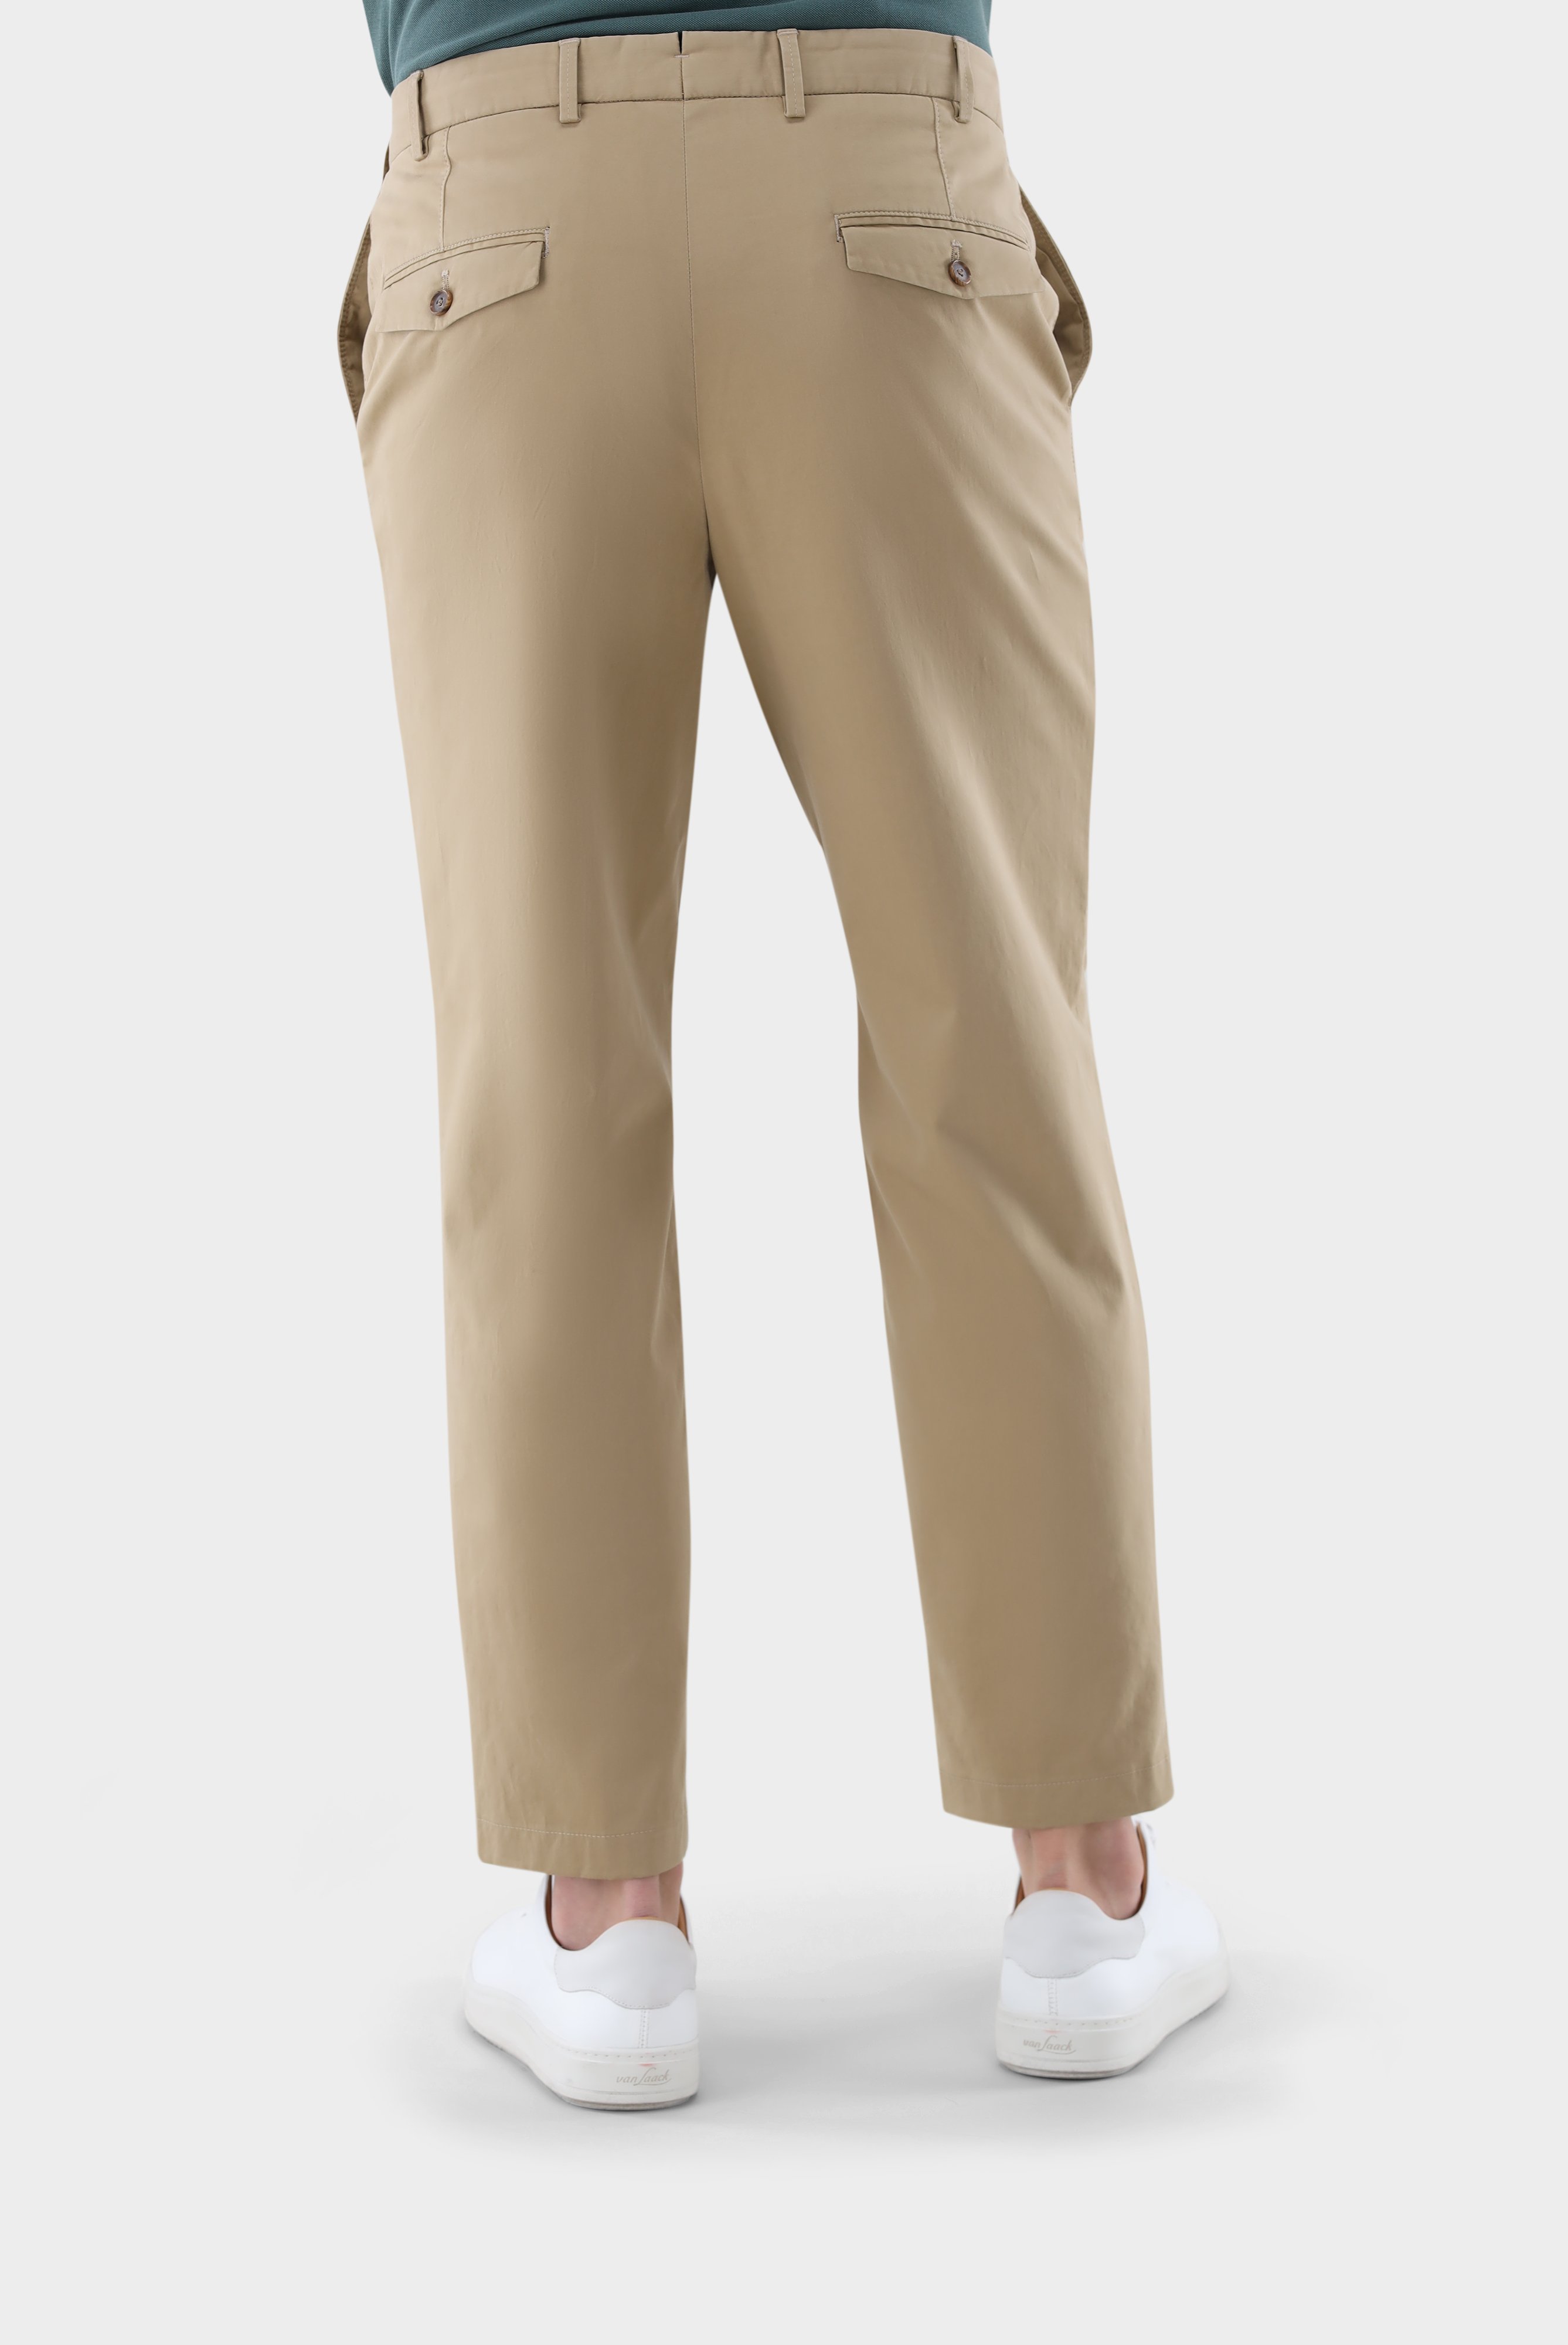 Jeans & Trousers+Straight-Leg Chinos with Stretch+80.7844..J00151.140.46